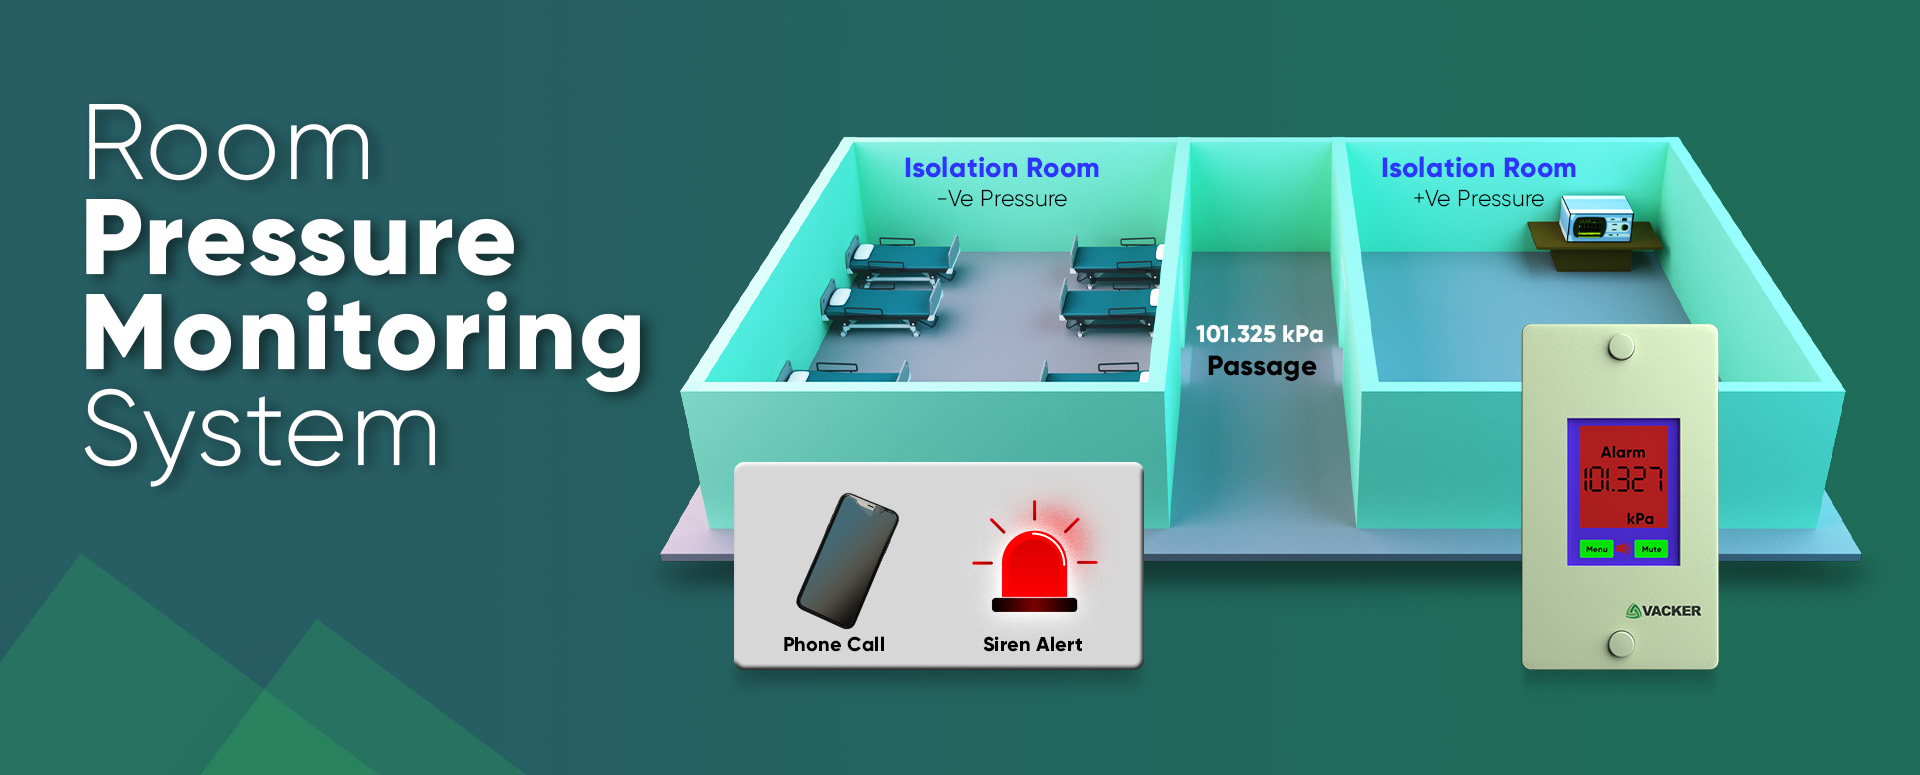 room-pressure-monitoring-system